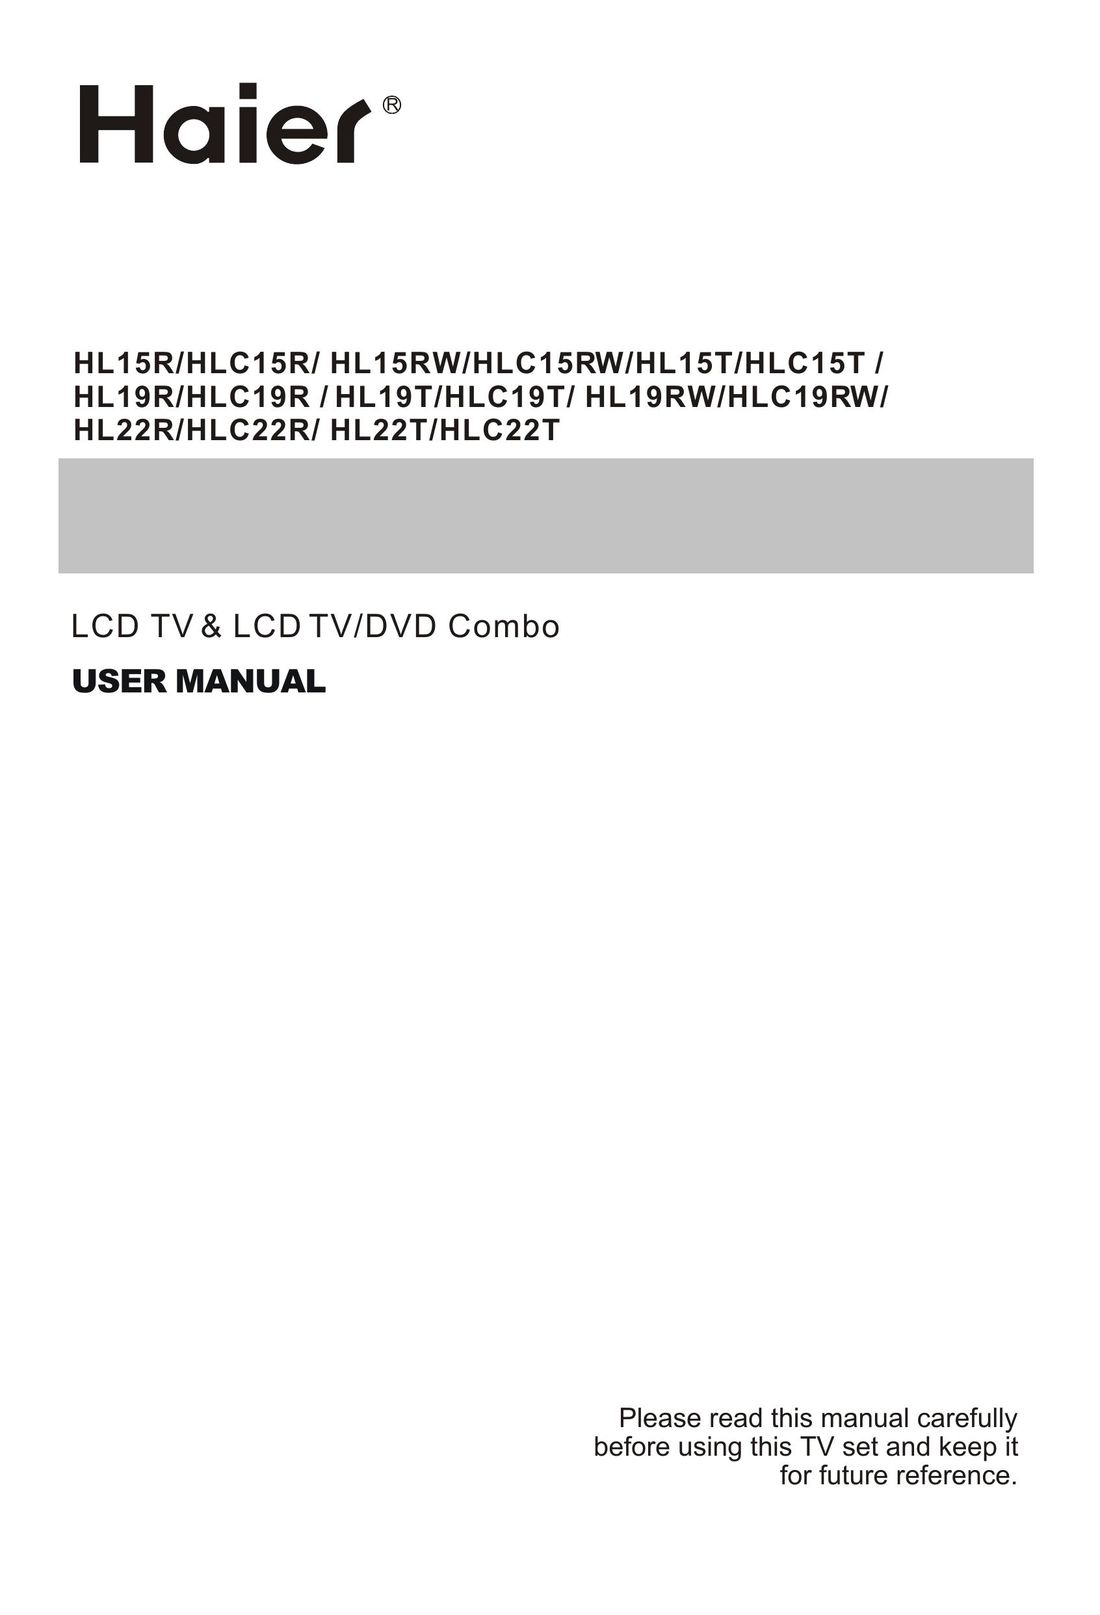 Haier HL19T Flat Panel Television User Manual